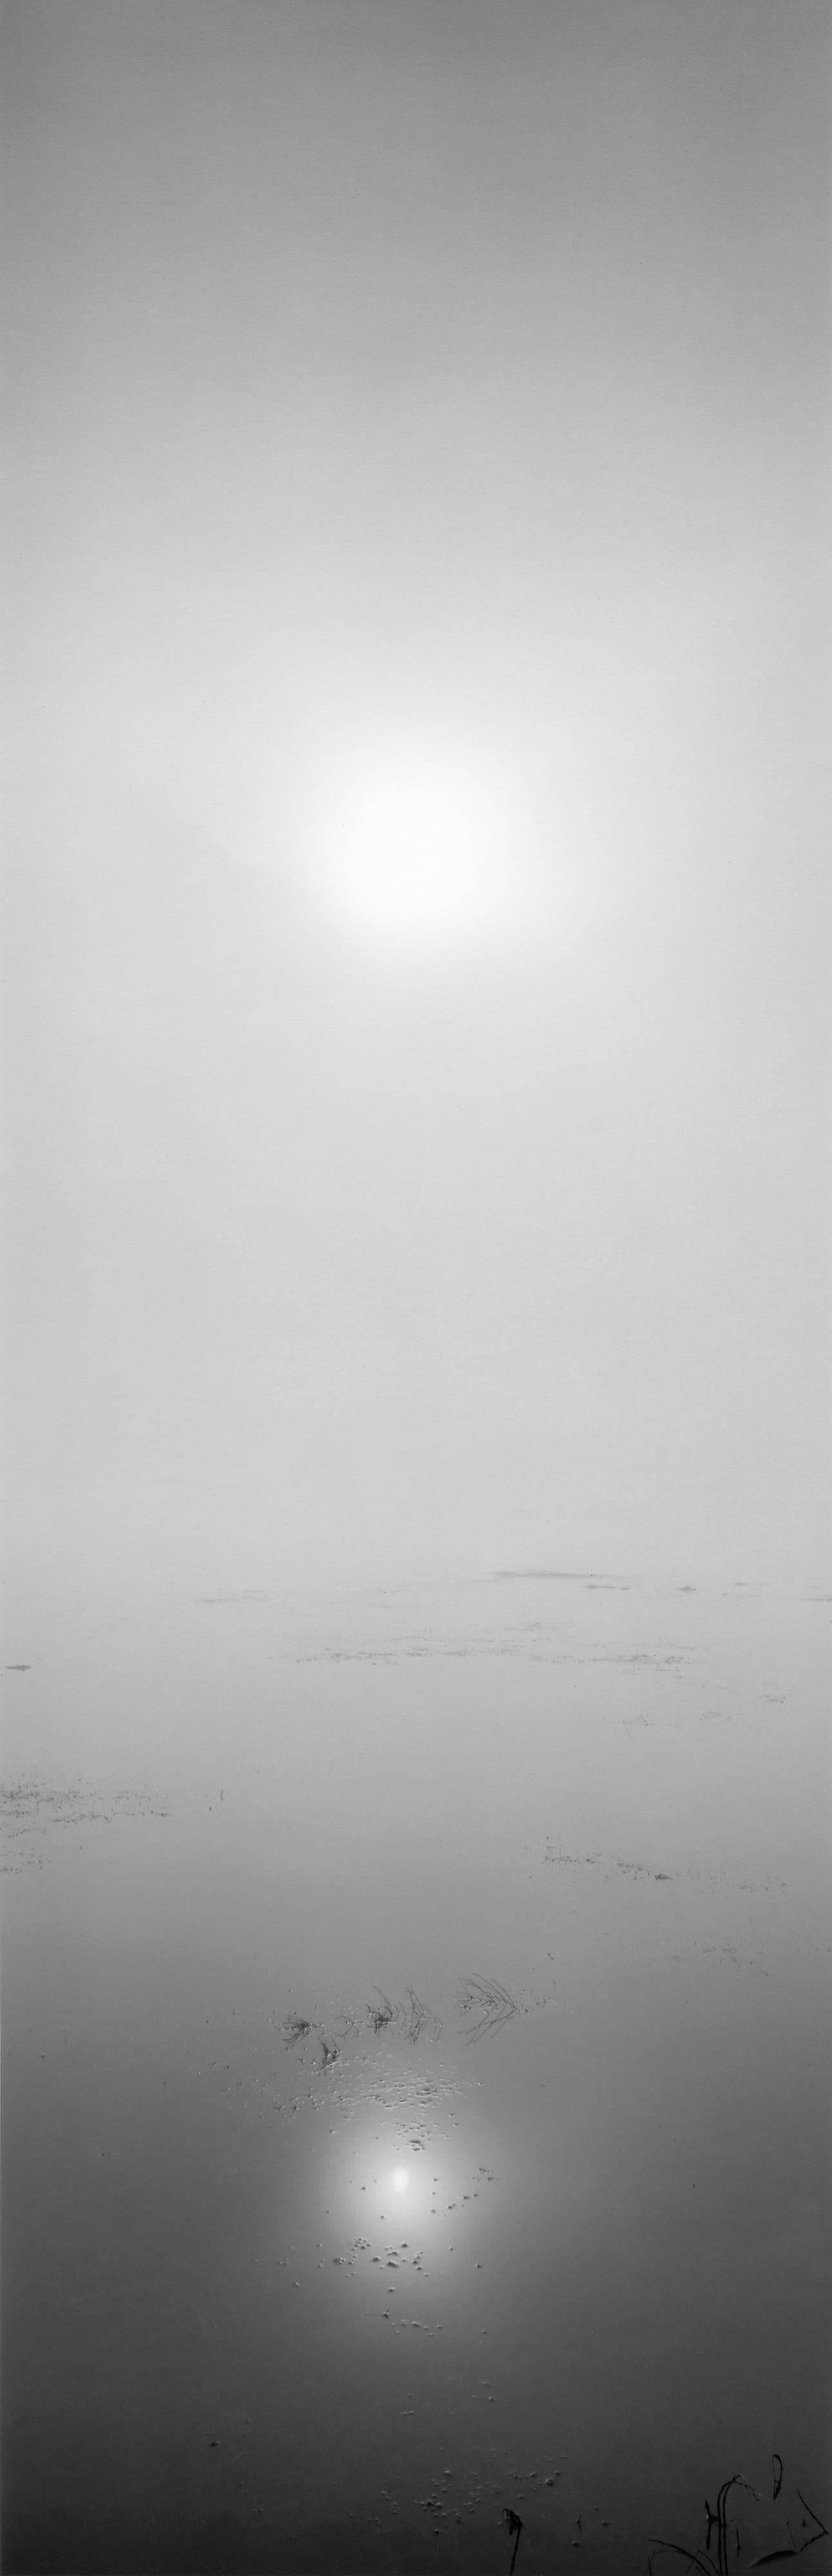 David H. Gibson Black and White Photograph - Sunrise, August 29, 2005, 8:40 AM, Eagle Nest Lake, New Mexico)